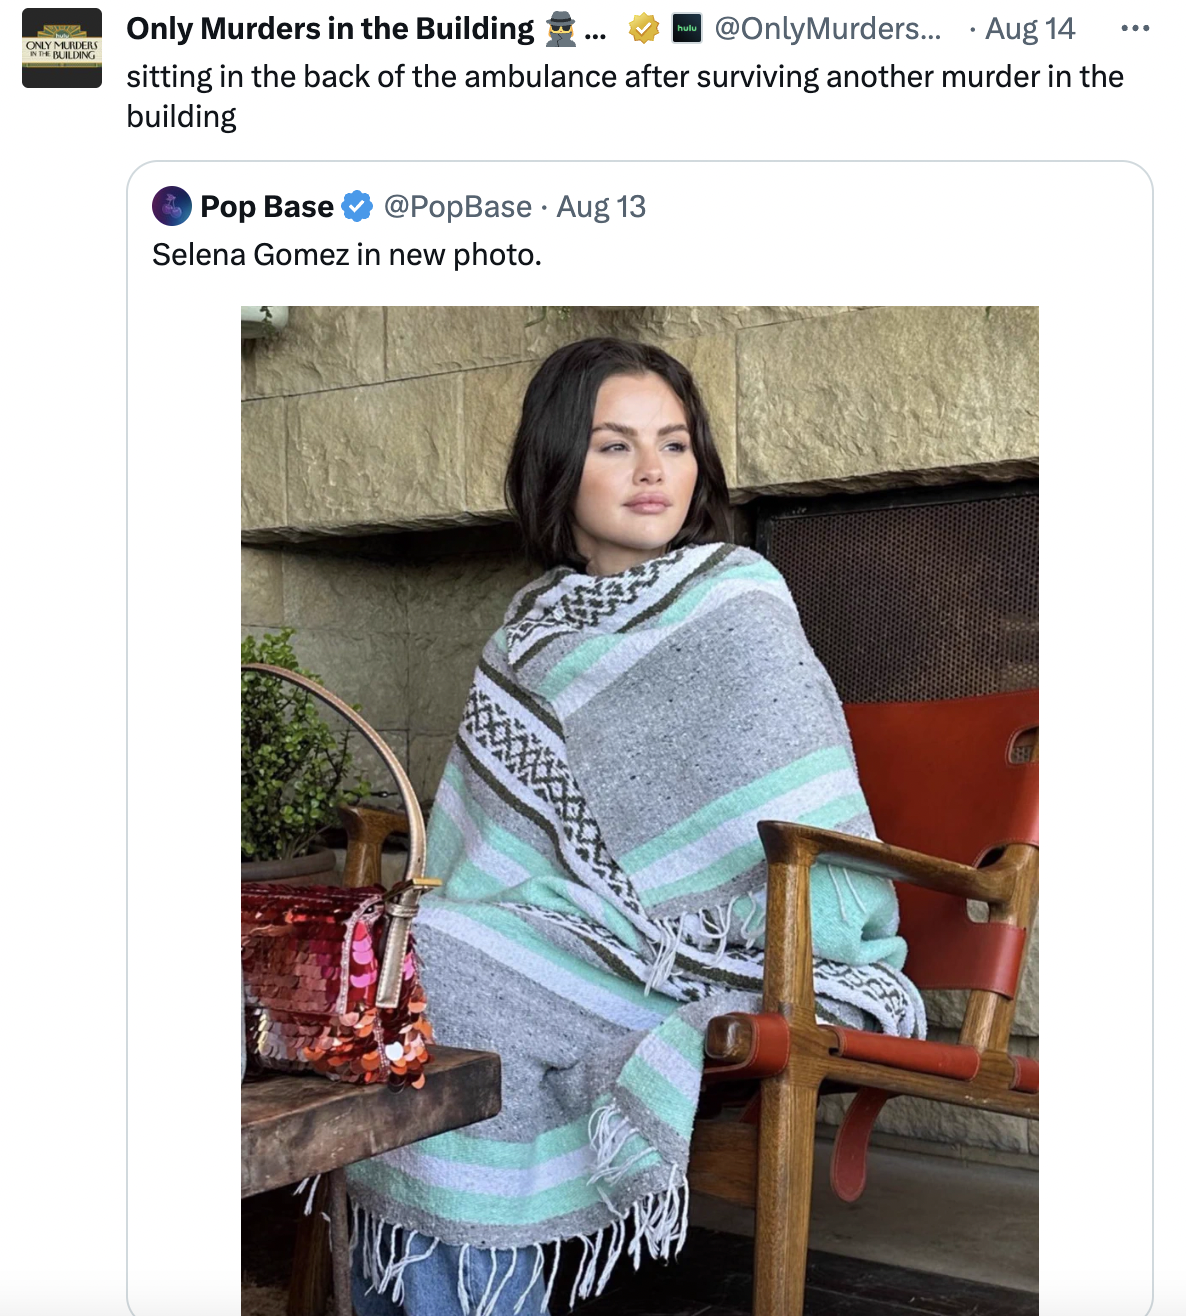 selena gomez in a blanket - stole - Only Murders in the Building... .... Aug 14 sitting in the back of the ambulance after surviving another murder in the building Pop Base Aug 13 Selena Gomez in new photo. Te 2744